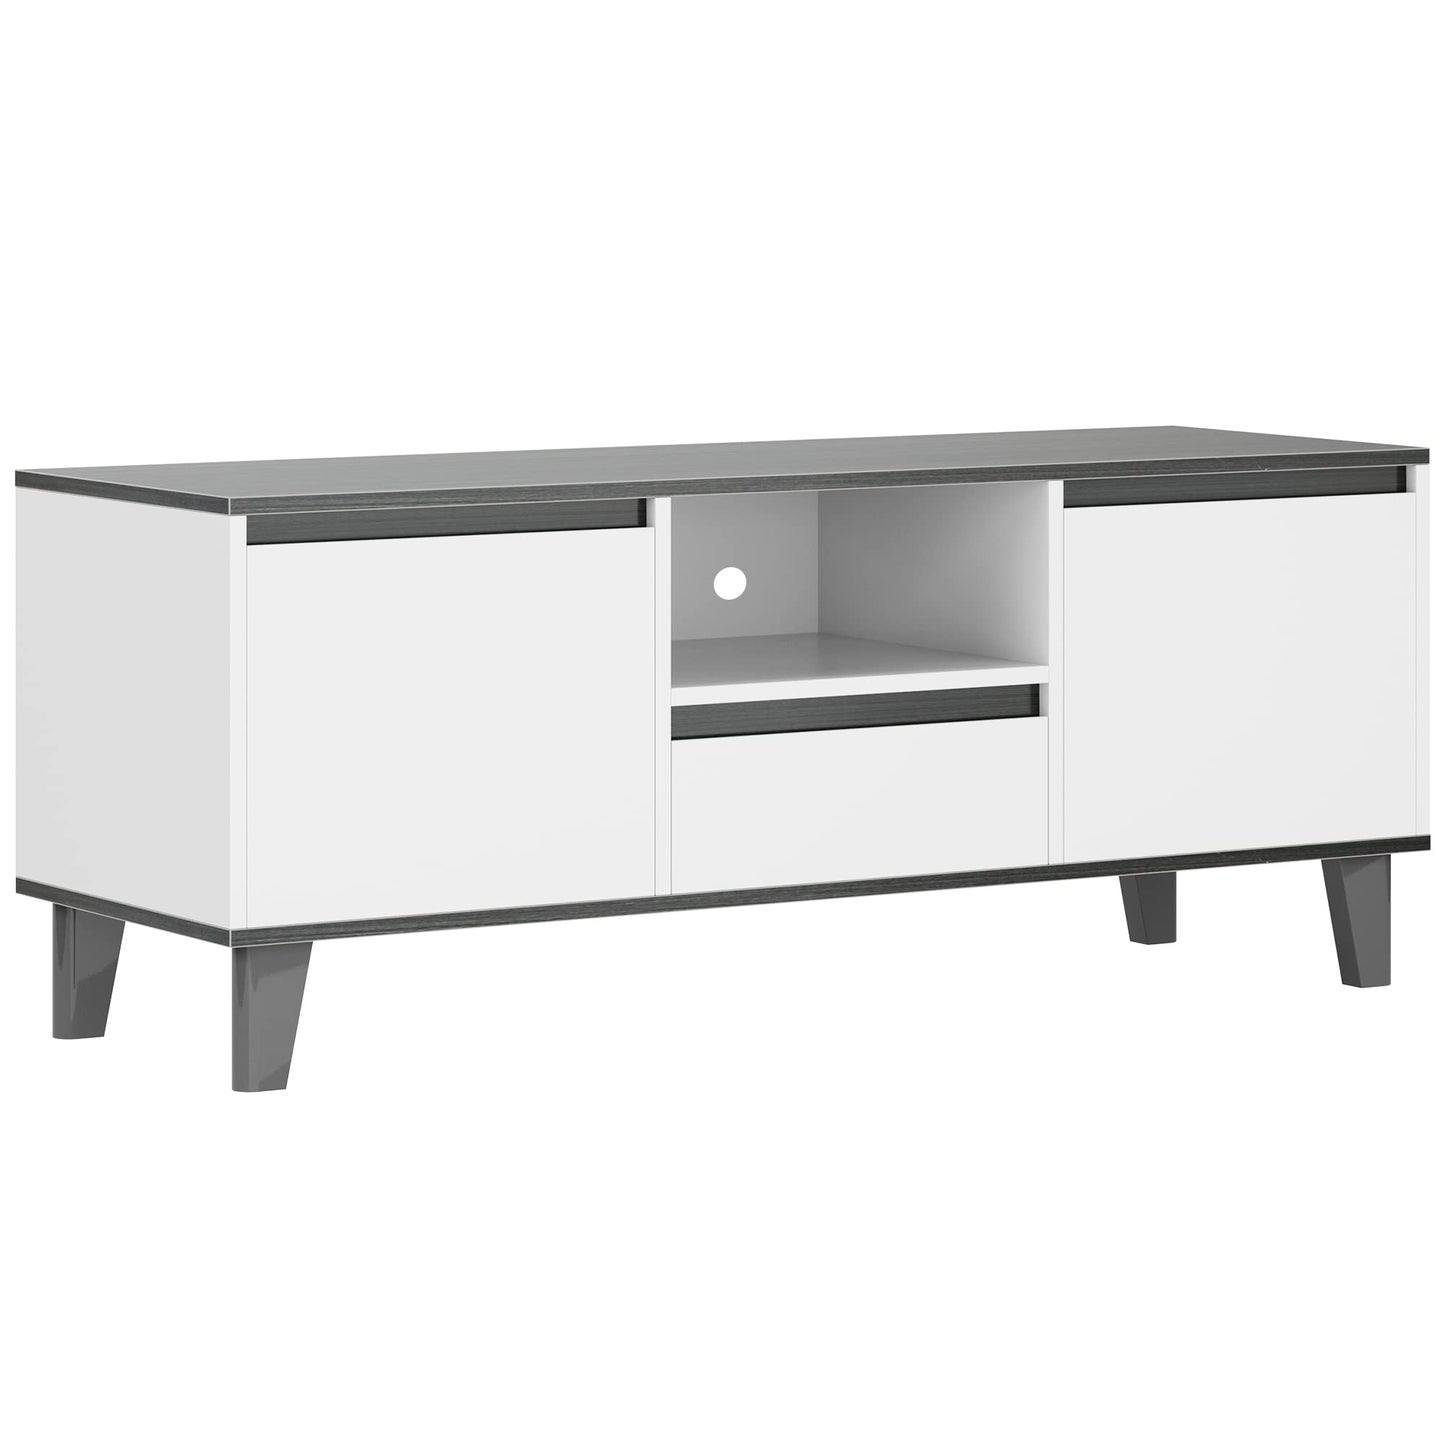 SogesHome TV Stand with 2-Door Cabinet, Entertainment Center for TVs Up with 1-Storage Cube&1-Drawer, TV Media Storage Console Table for Living Room, Bedroom,White&Grey